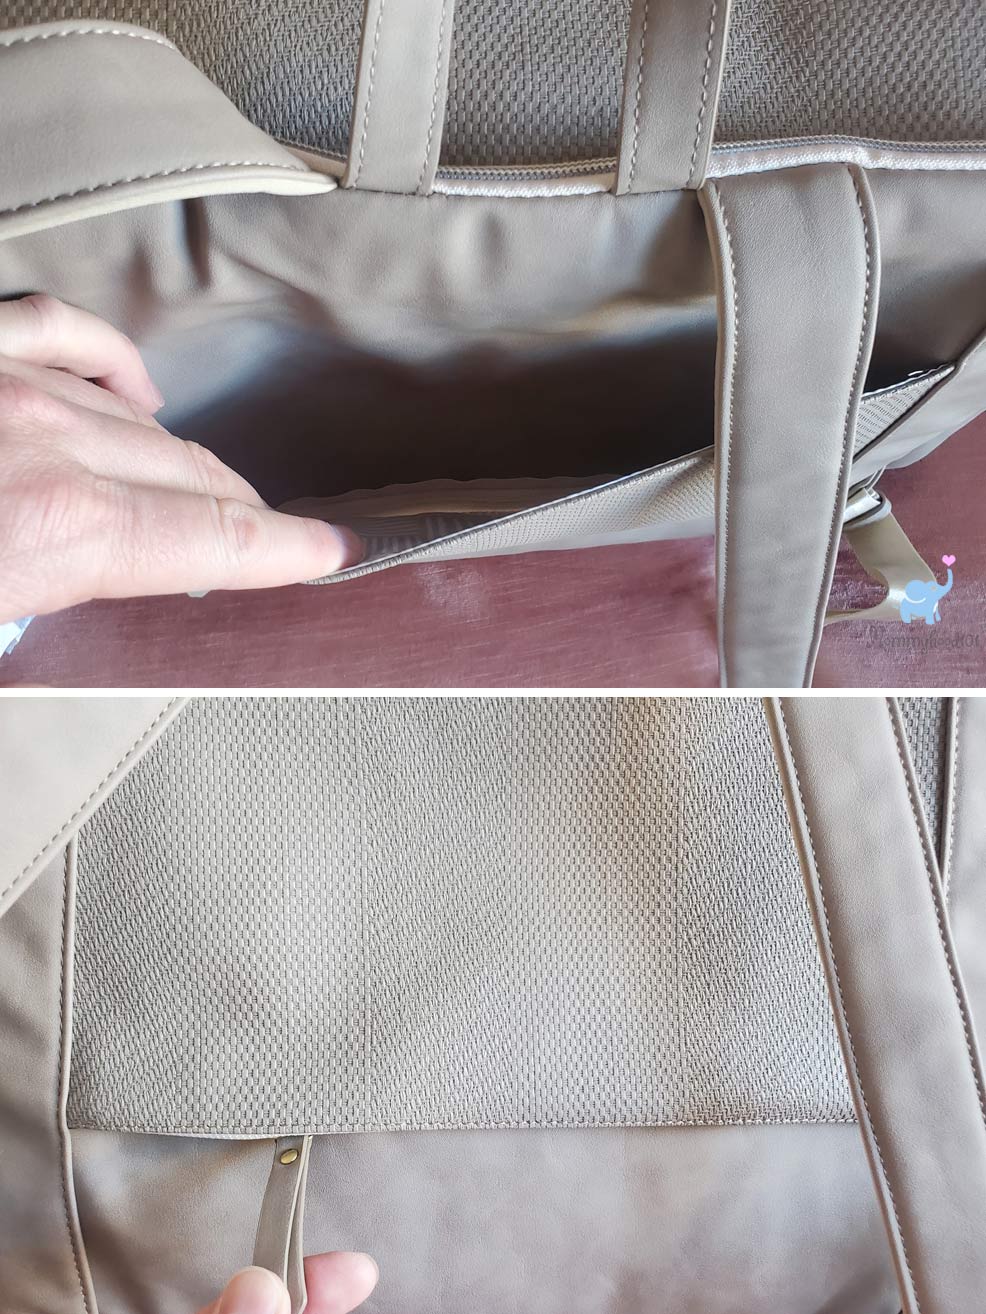 trolly slot on the petunia pickle bottom boxy deluxe diaper bag